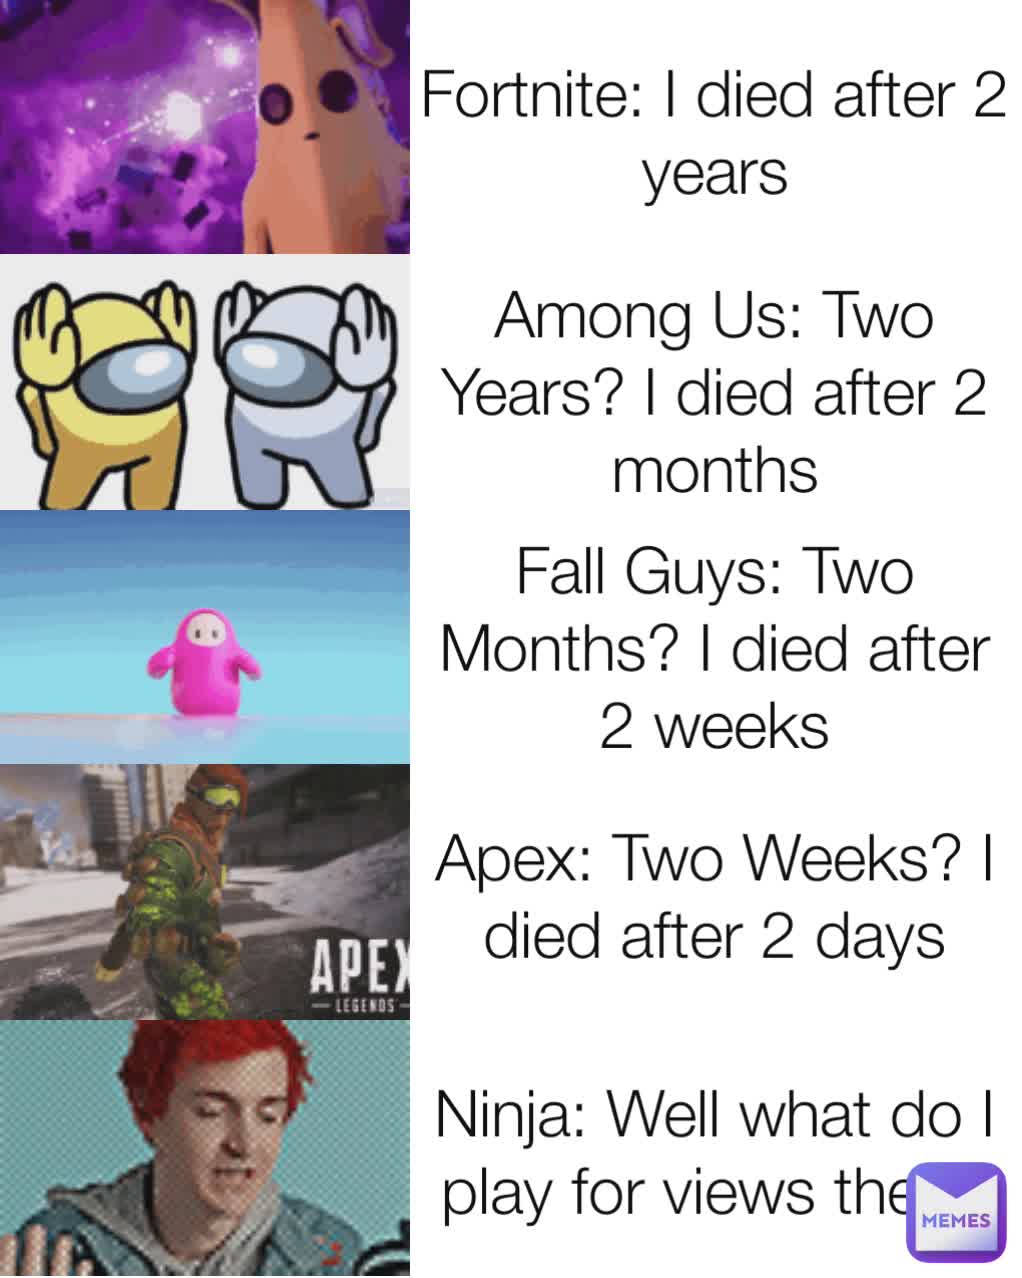 Fortnite: I died after 2 years Among Us: Two Years? I died after 2 months Fall Guys: Two Months? I died after 2 weeks Apex: Two Weeks? I died after 2 days Ninja: Well what do I play for views then?